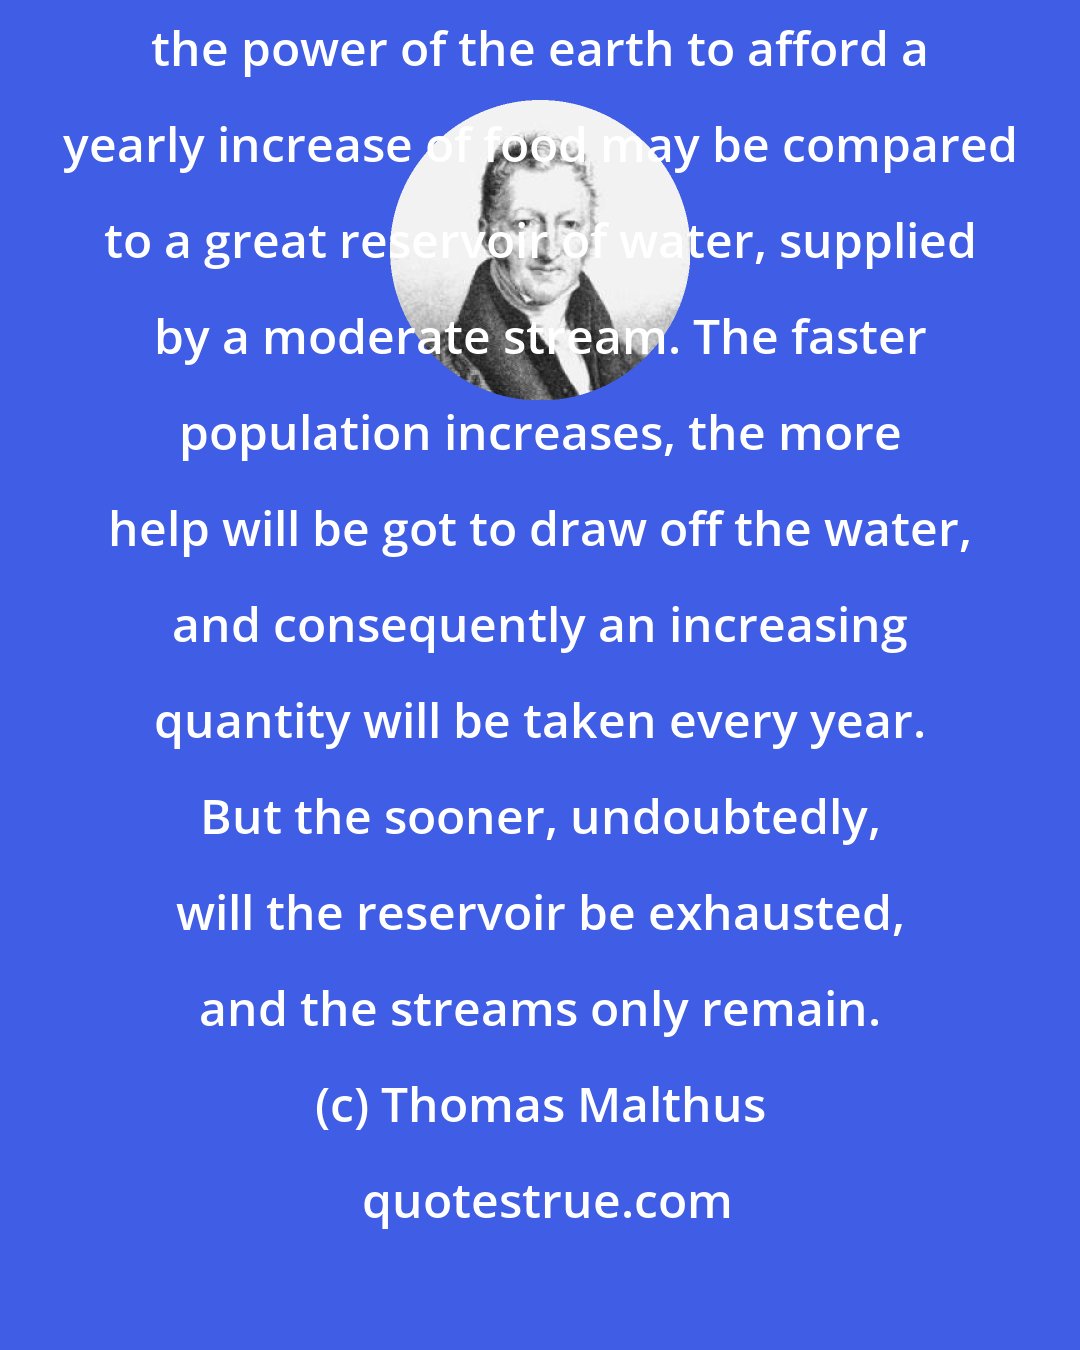 Thomas Malthus: Where there are few people, and a great quantity of fertile land, the power of the earth to afford a yearly increase of food may be compared to a great reservoir of water, supplied by a moderate stream. The faster population increases, the more help will be got to draw off the water, and consequently an increasing quantity will be taken every year. But the sooner, undoubtedly, will the reservoir be exhausted, and the streams only remain.